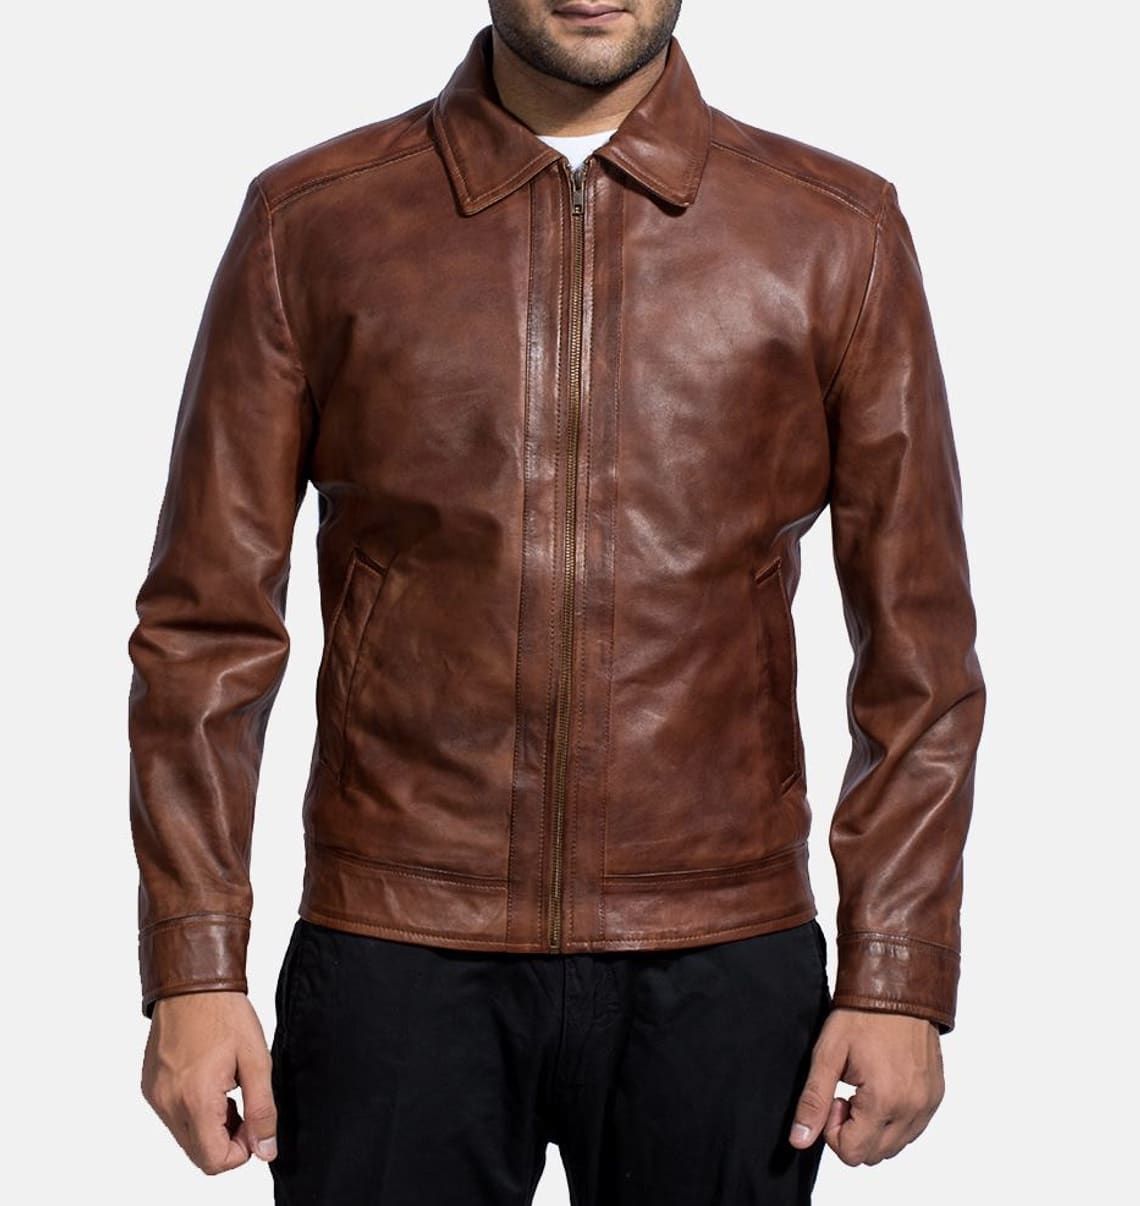 Brown Leather Jacket 7 Copy